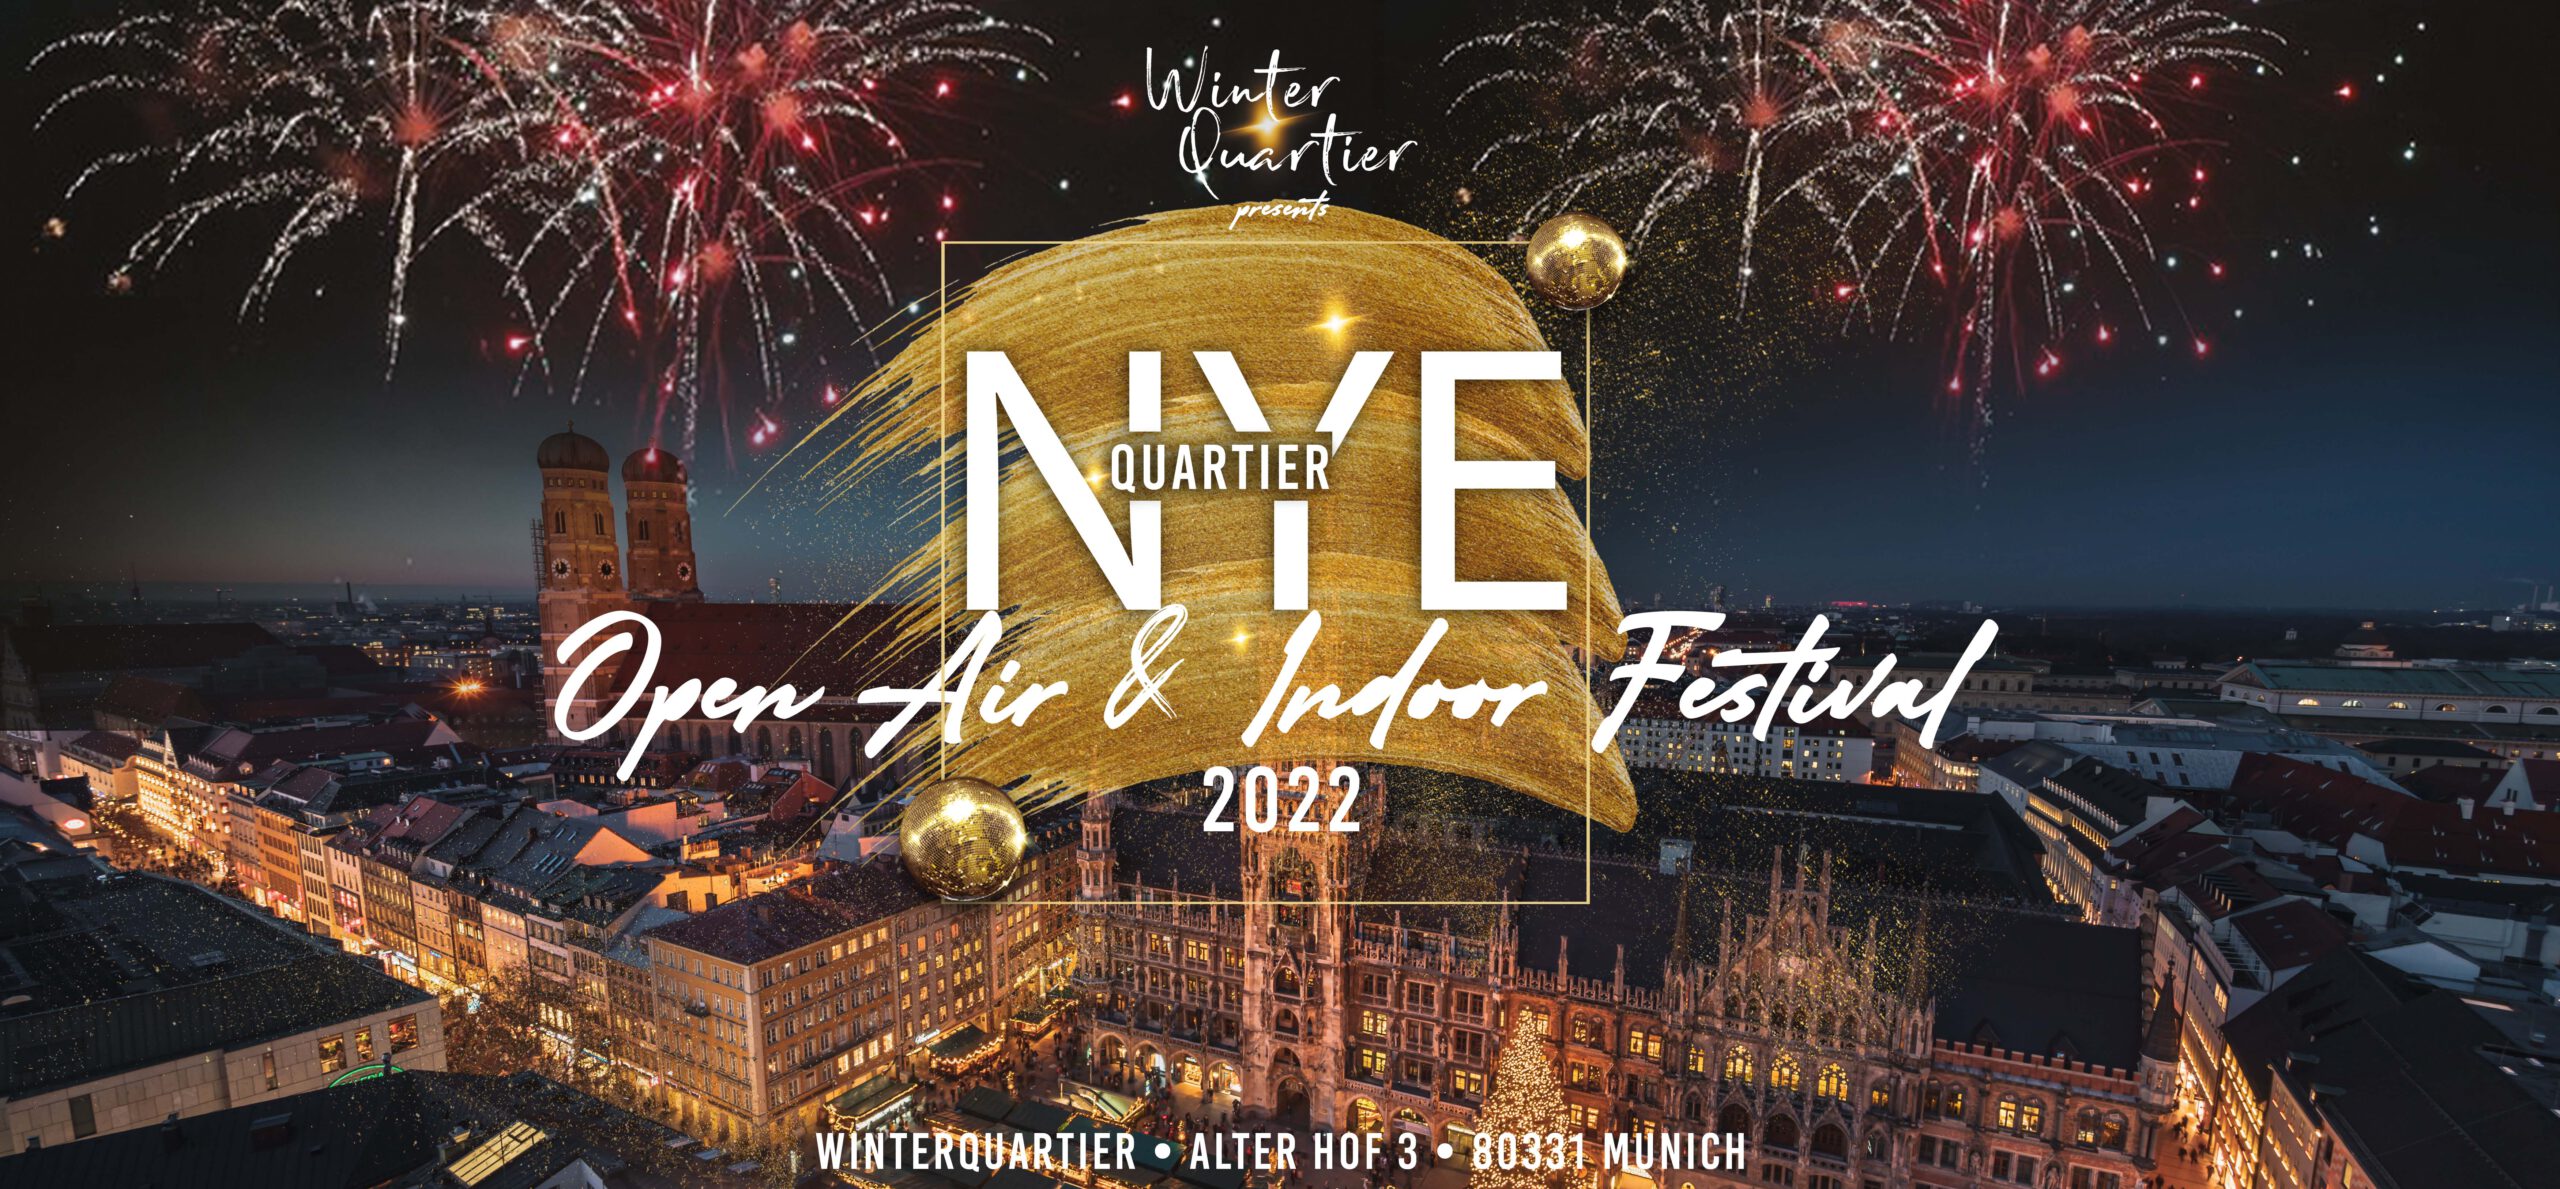 You are currently viewing Silvester in der Altstadt Open Air & Indoor Festival